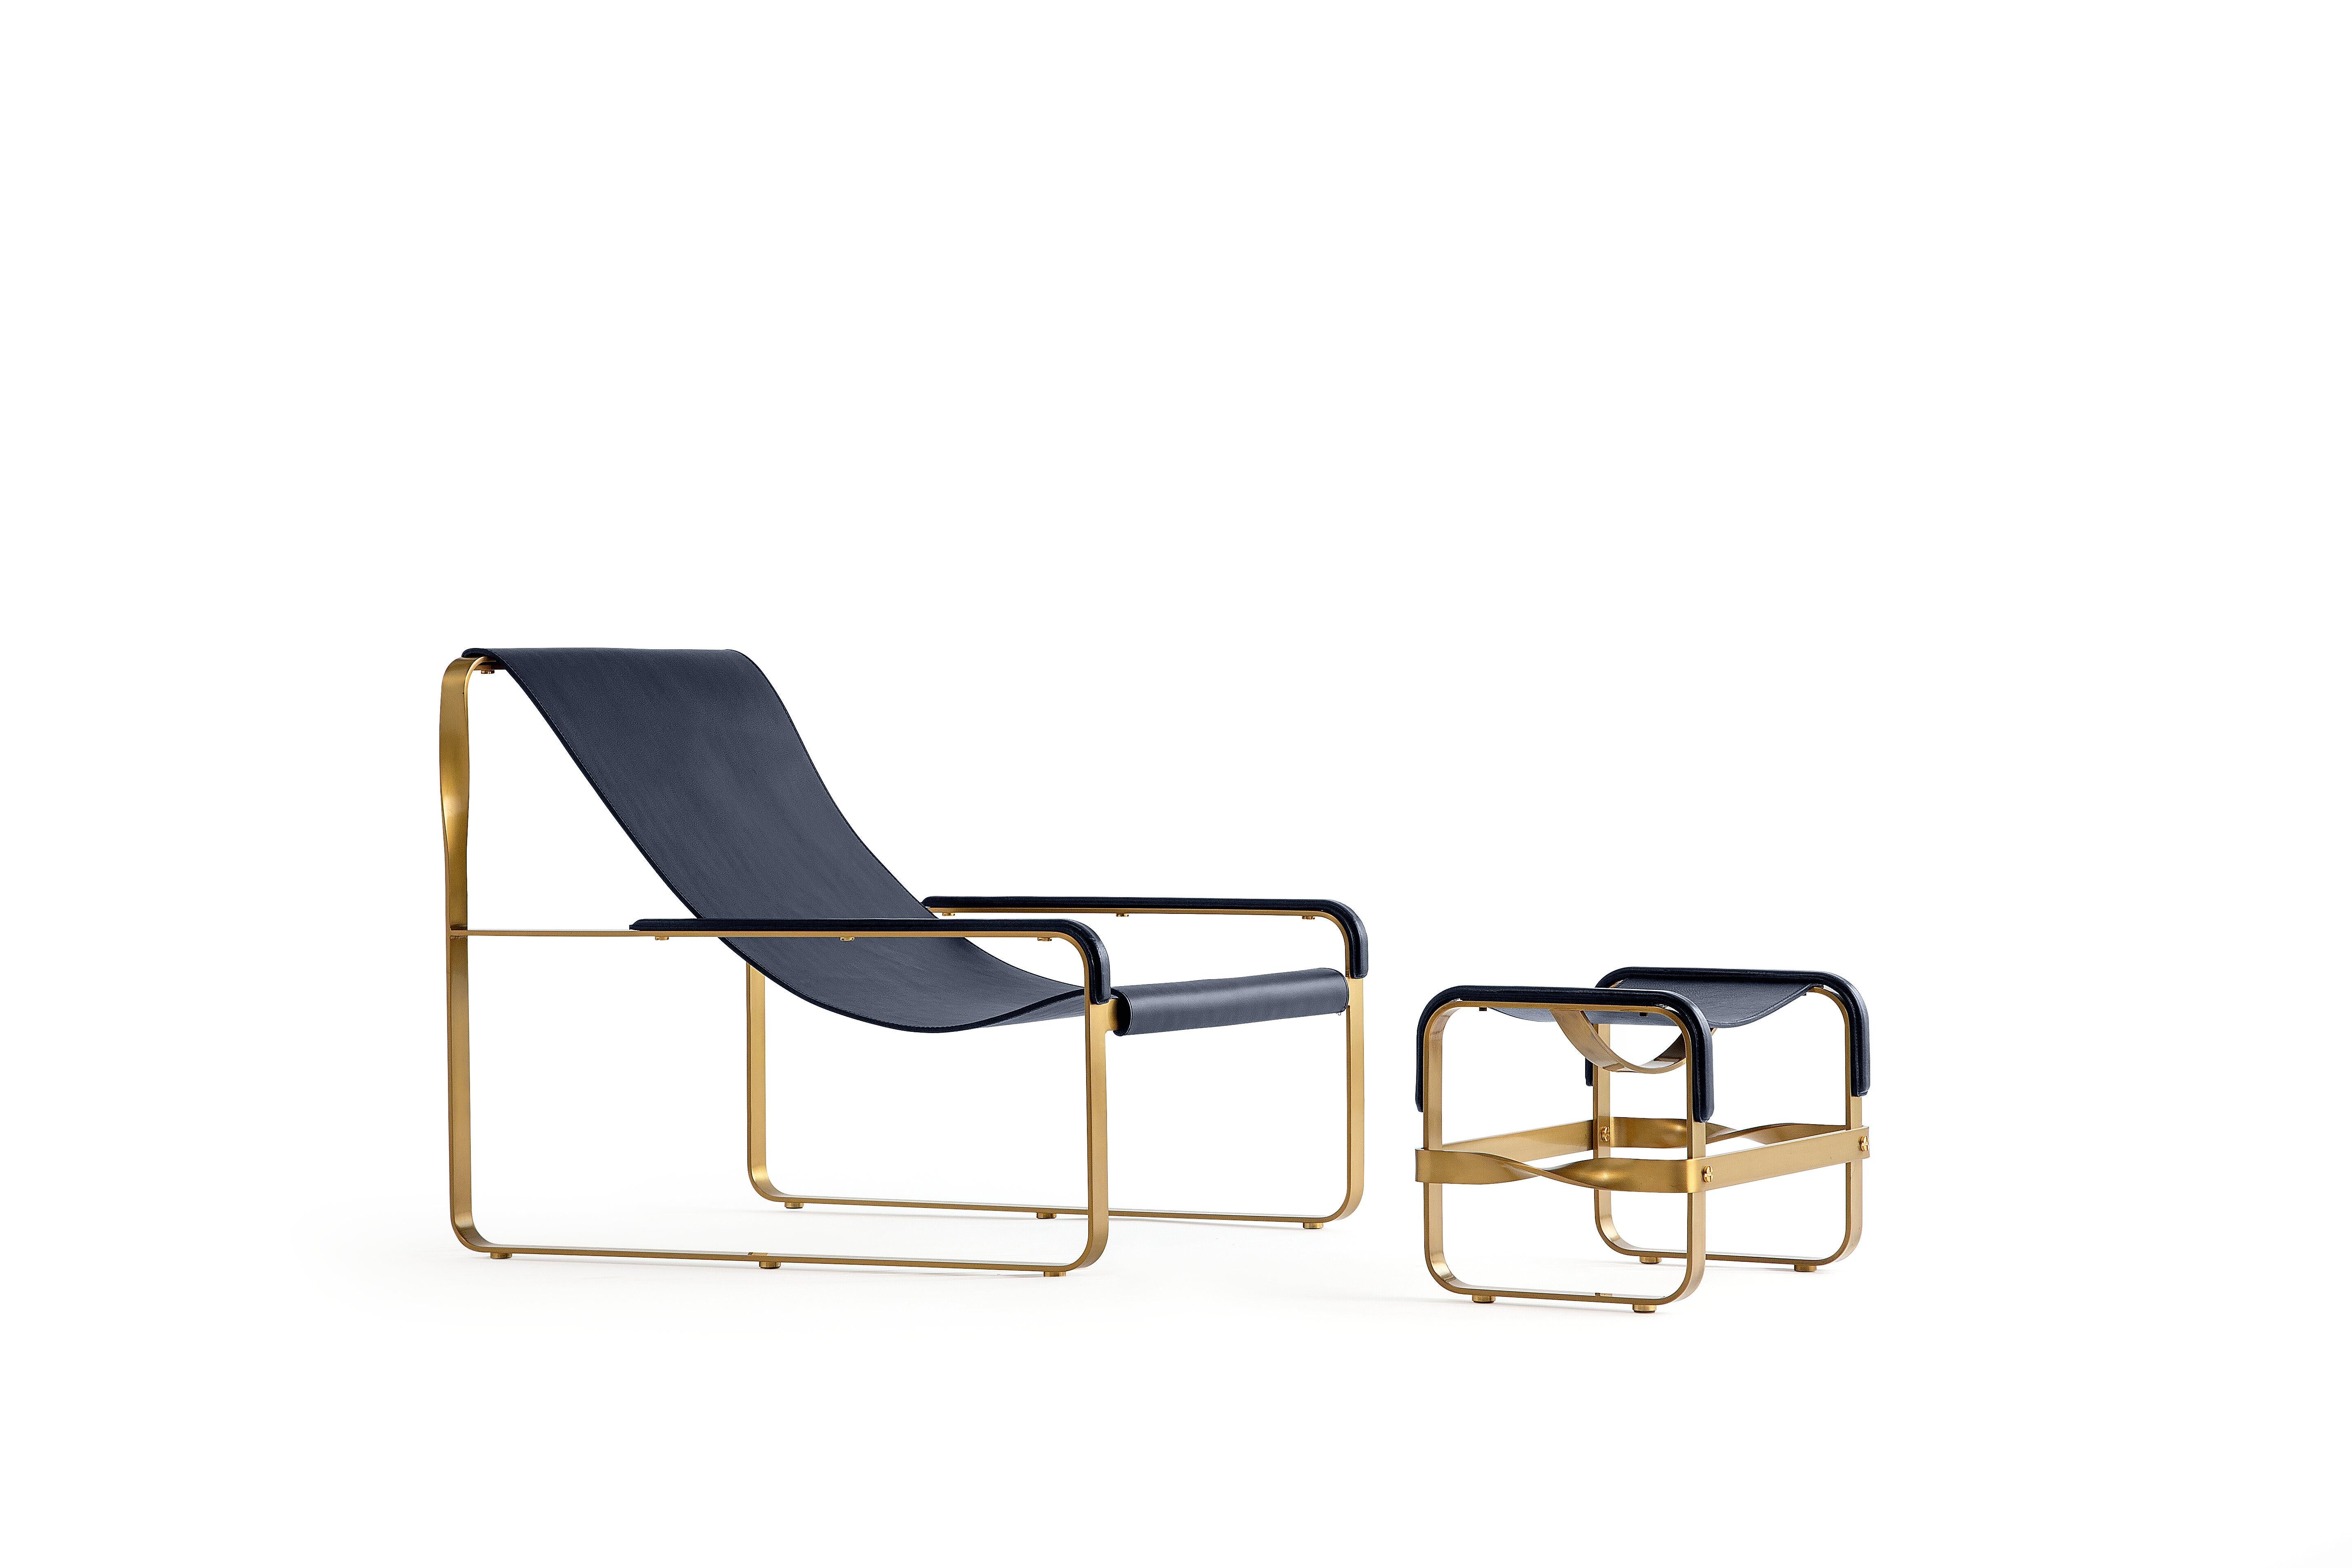 Classic Contemporary Chaise Lounge Aged Brass Steel & Navy Blue Leather Muster im Zustand „Gut“ im Angebot in Alcoy, Alicante